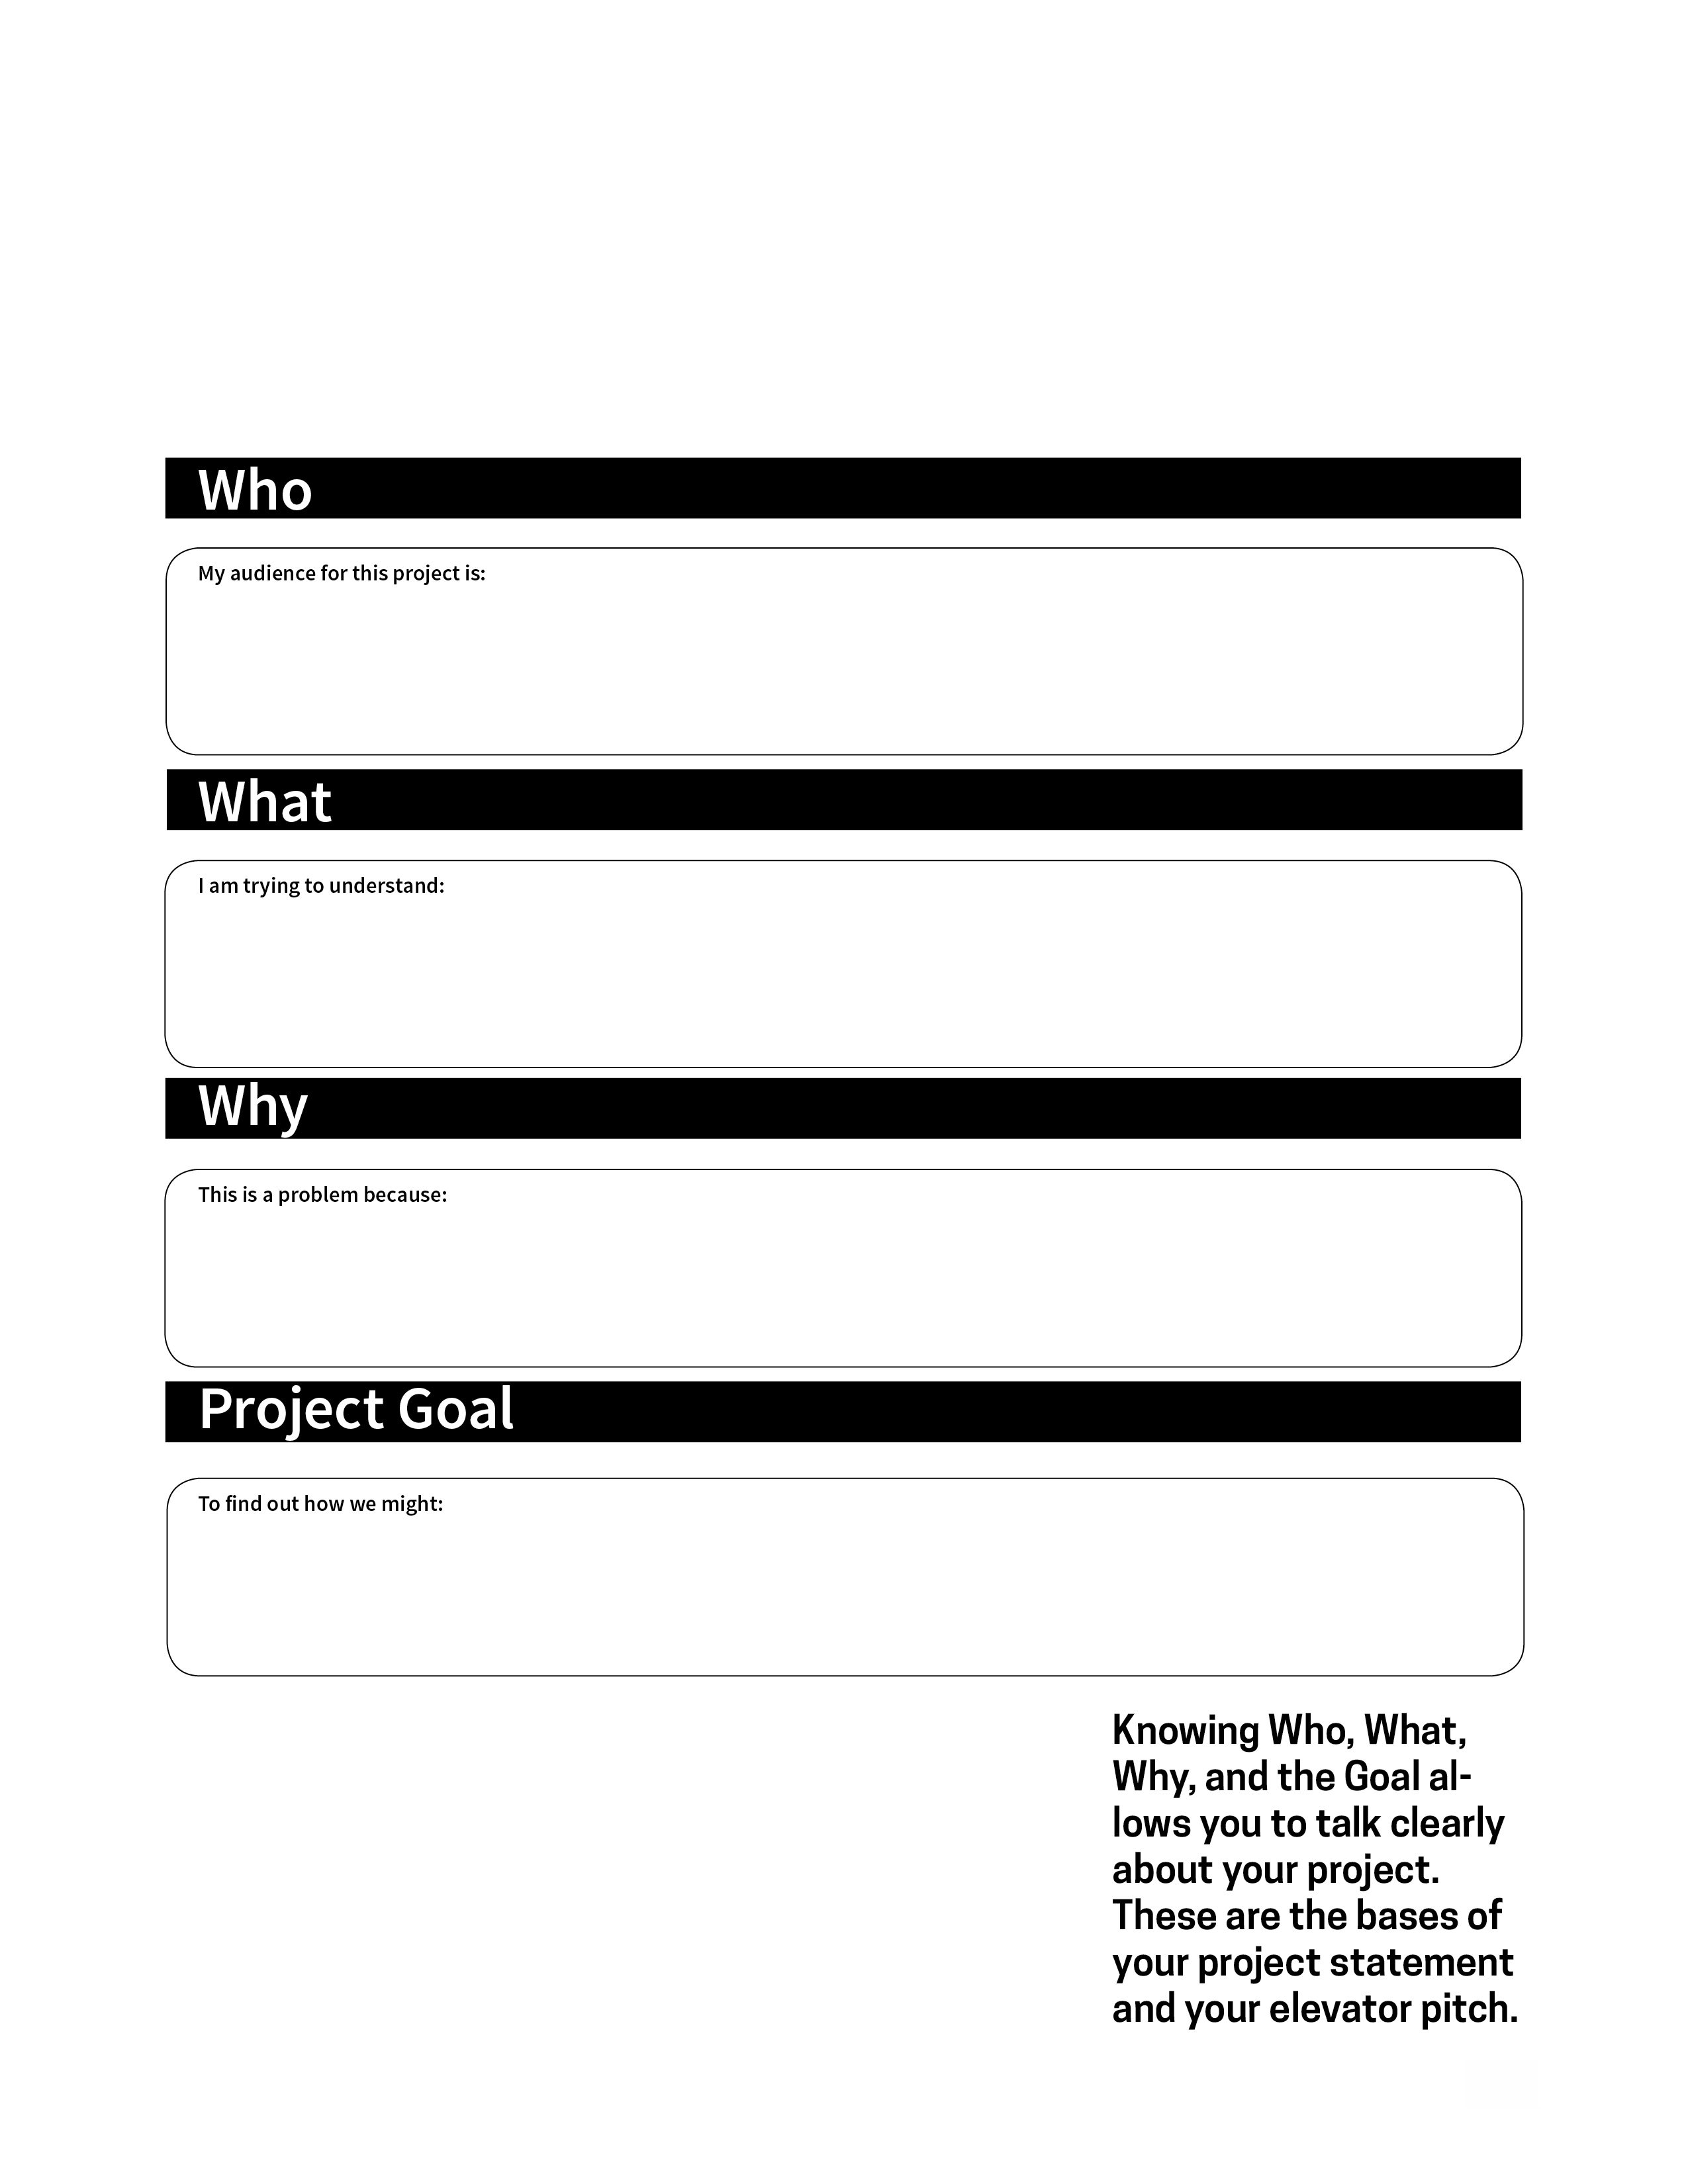 Framework for stating the Who, What, Why, and Project Goal of your work.